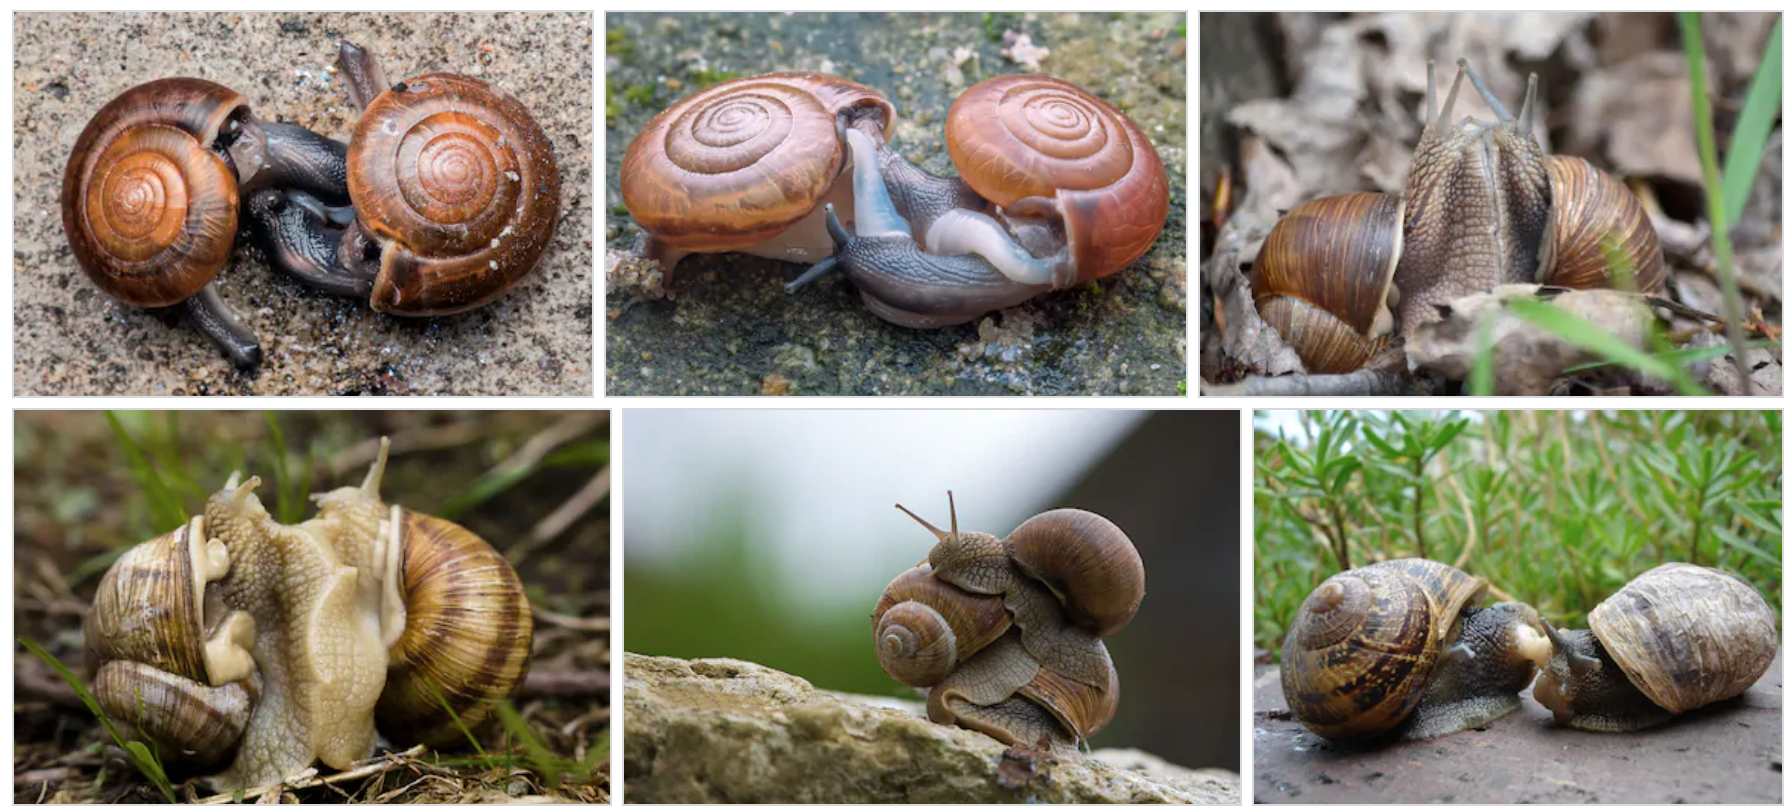 How do snails mate and lay eggs?